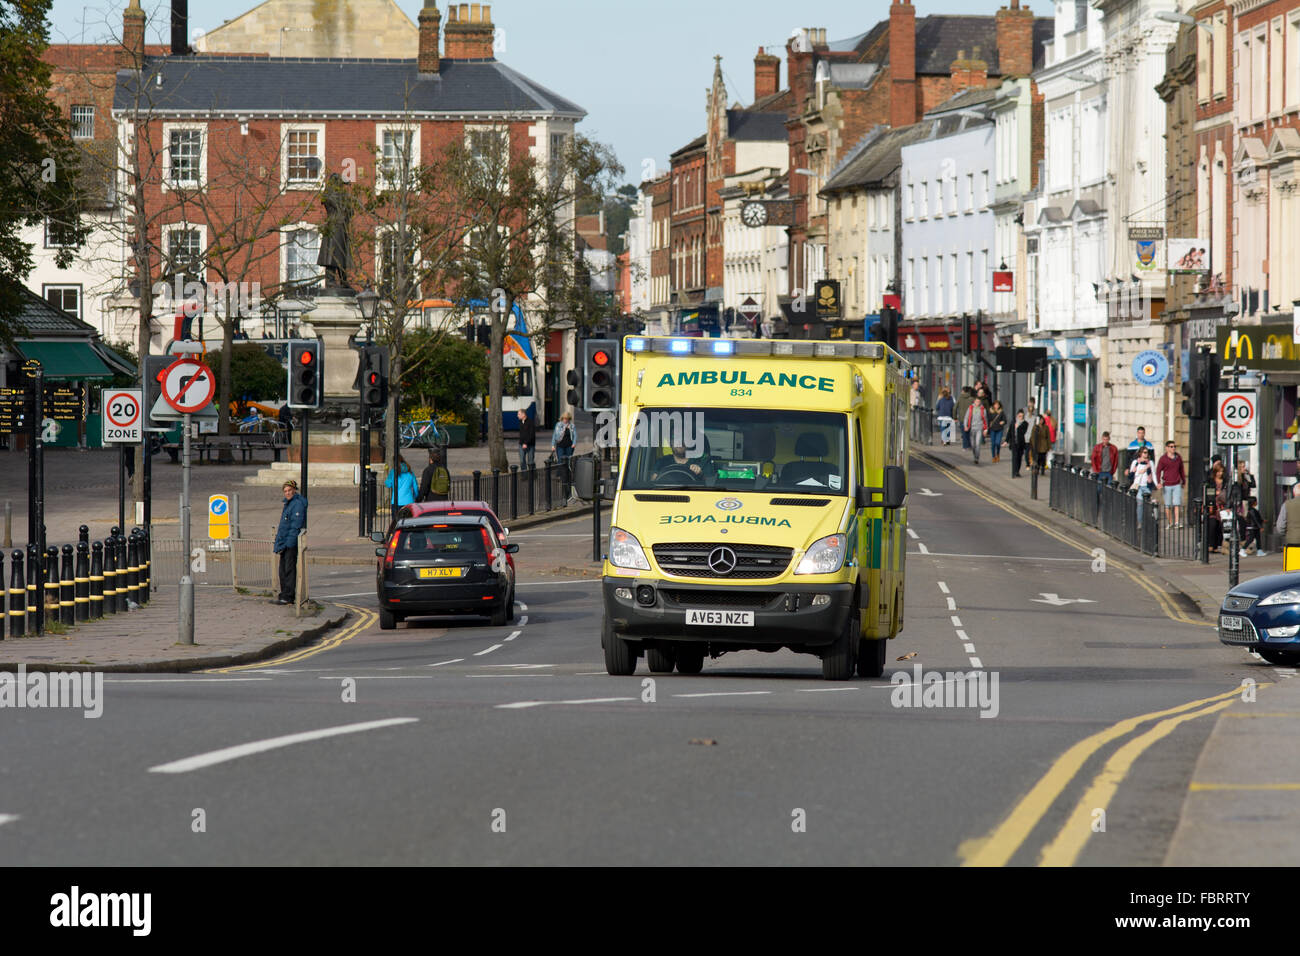 Ambulance responding to emergency with blue lights on in the High Street in Bedford, Bedfordshire, England Stock Photo